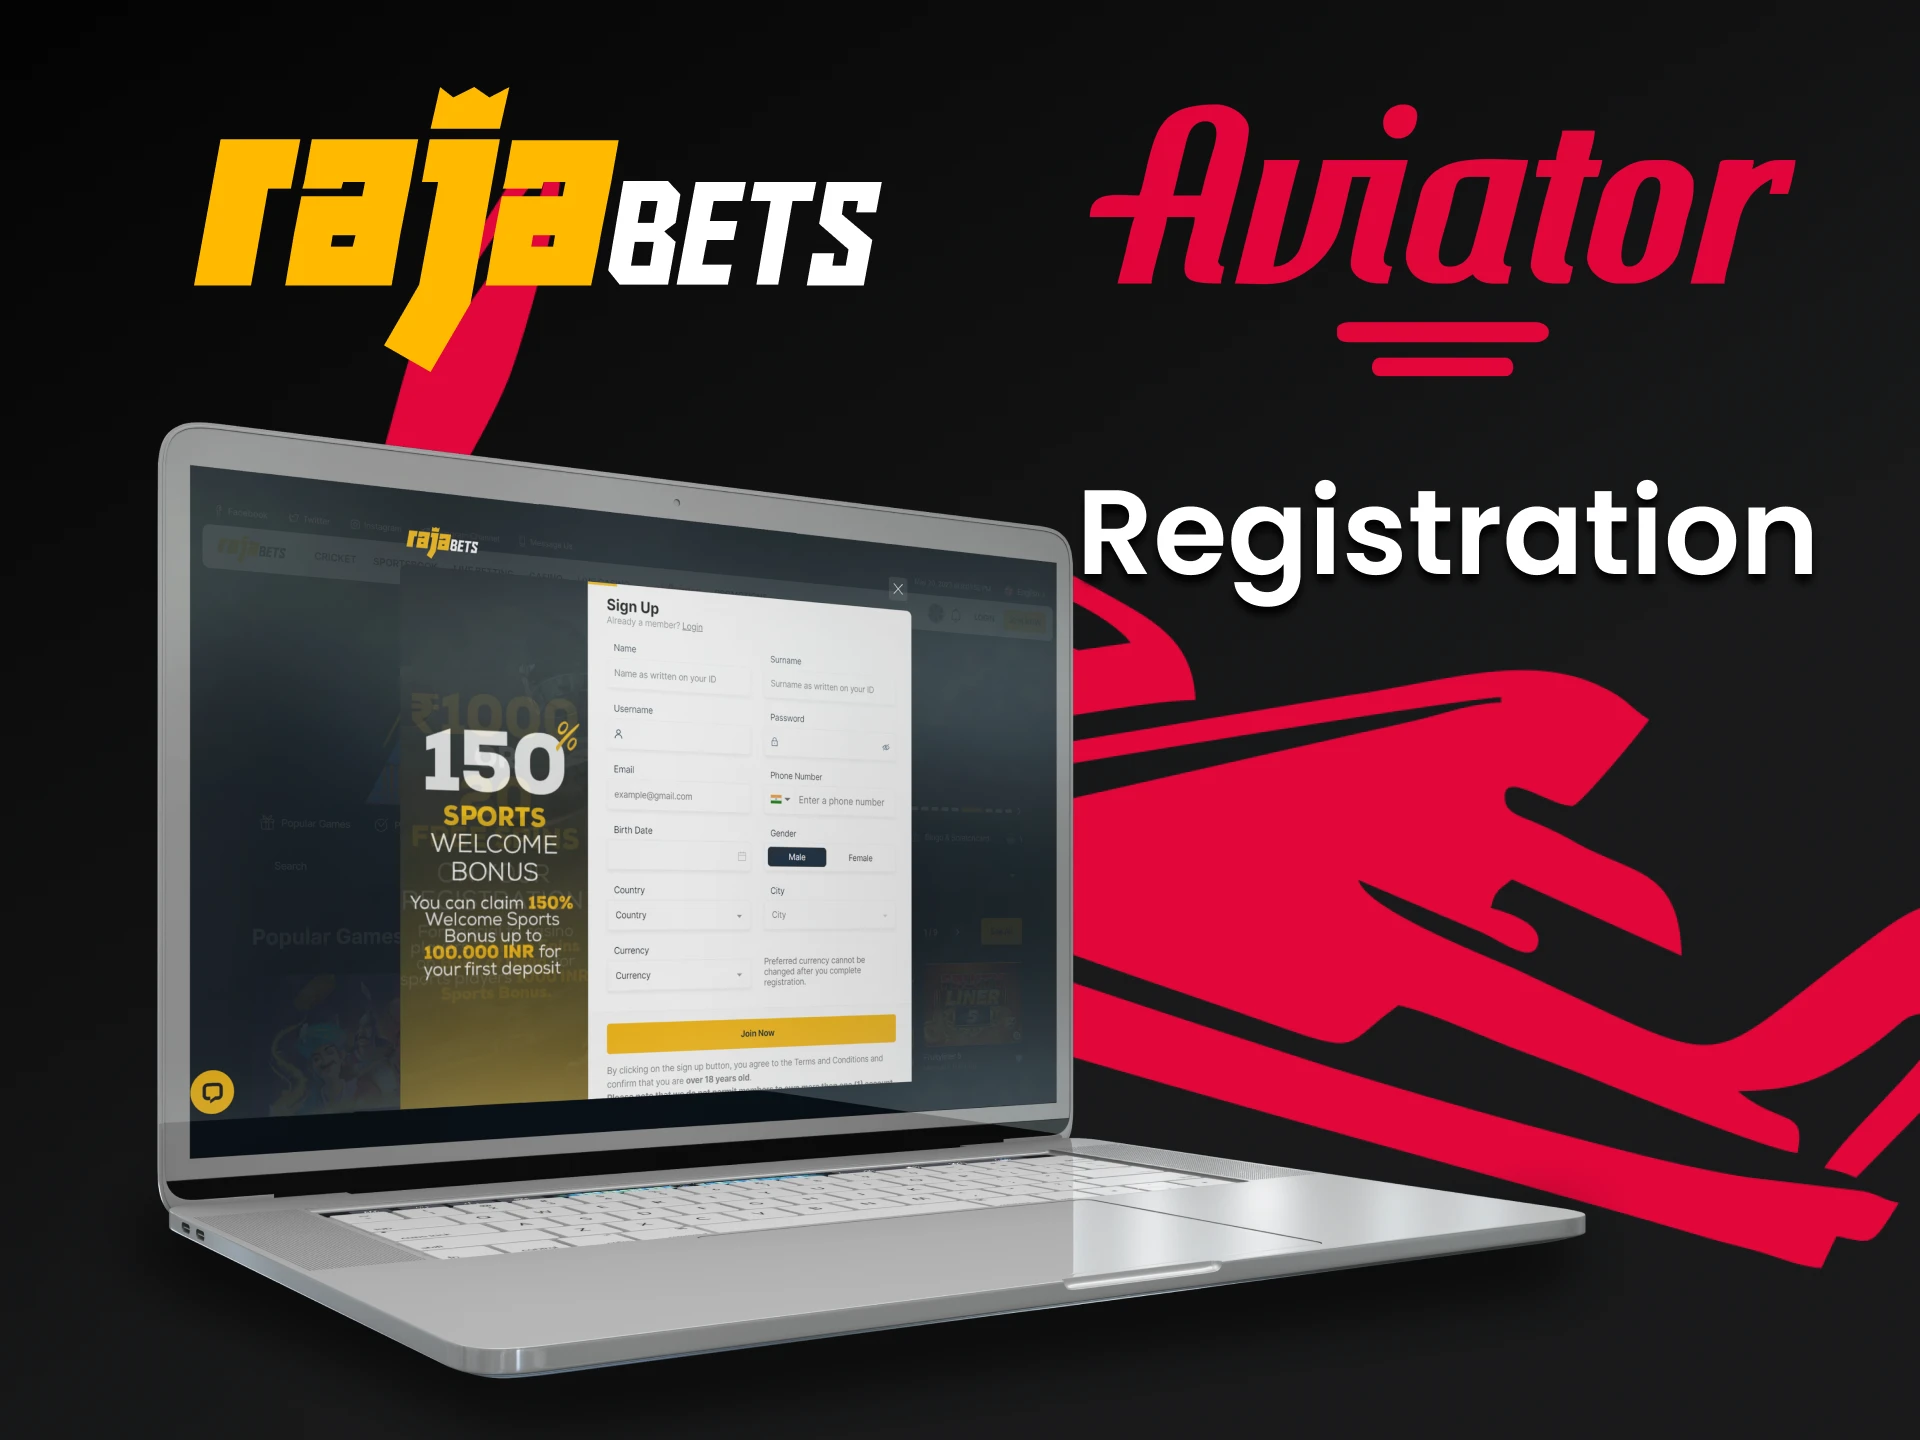 Create an account on Rajabets to play Aviator.